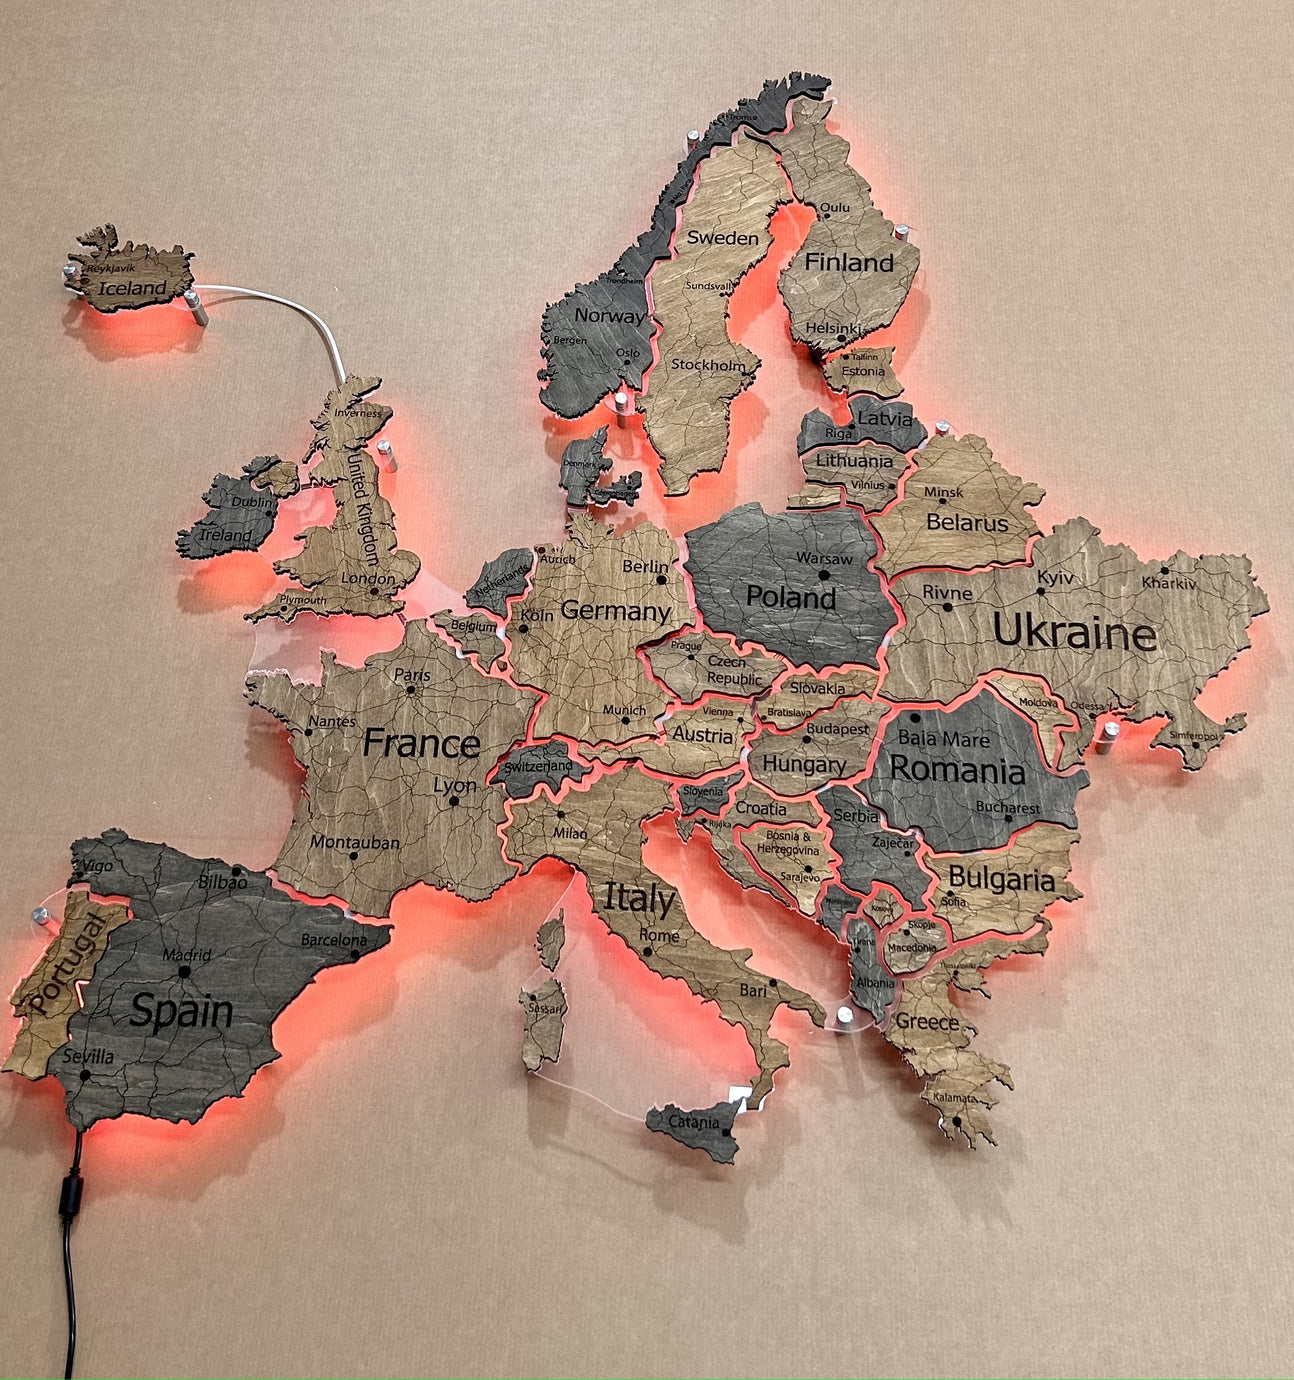 Europe LED RGB map on acrylic glass with backlighting between countries color Dark Tree